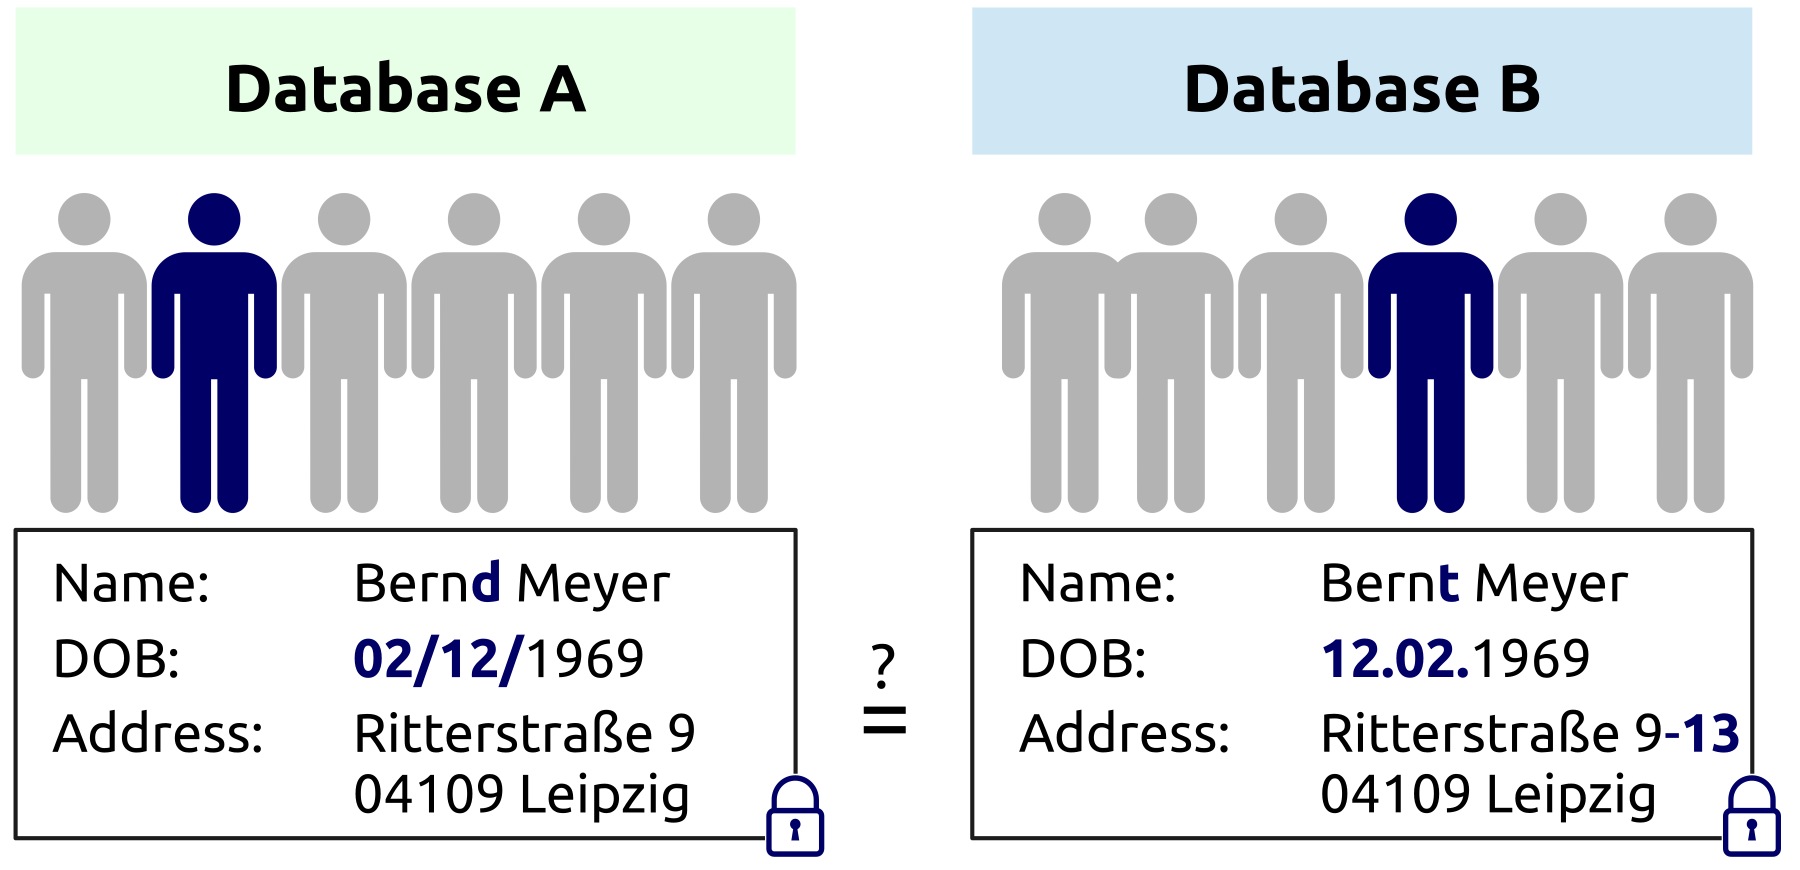 Example of a person with slightly different identifying attributes in two databases